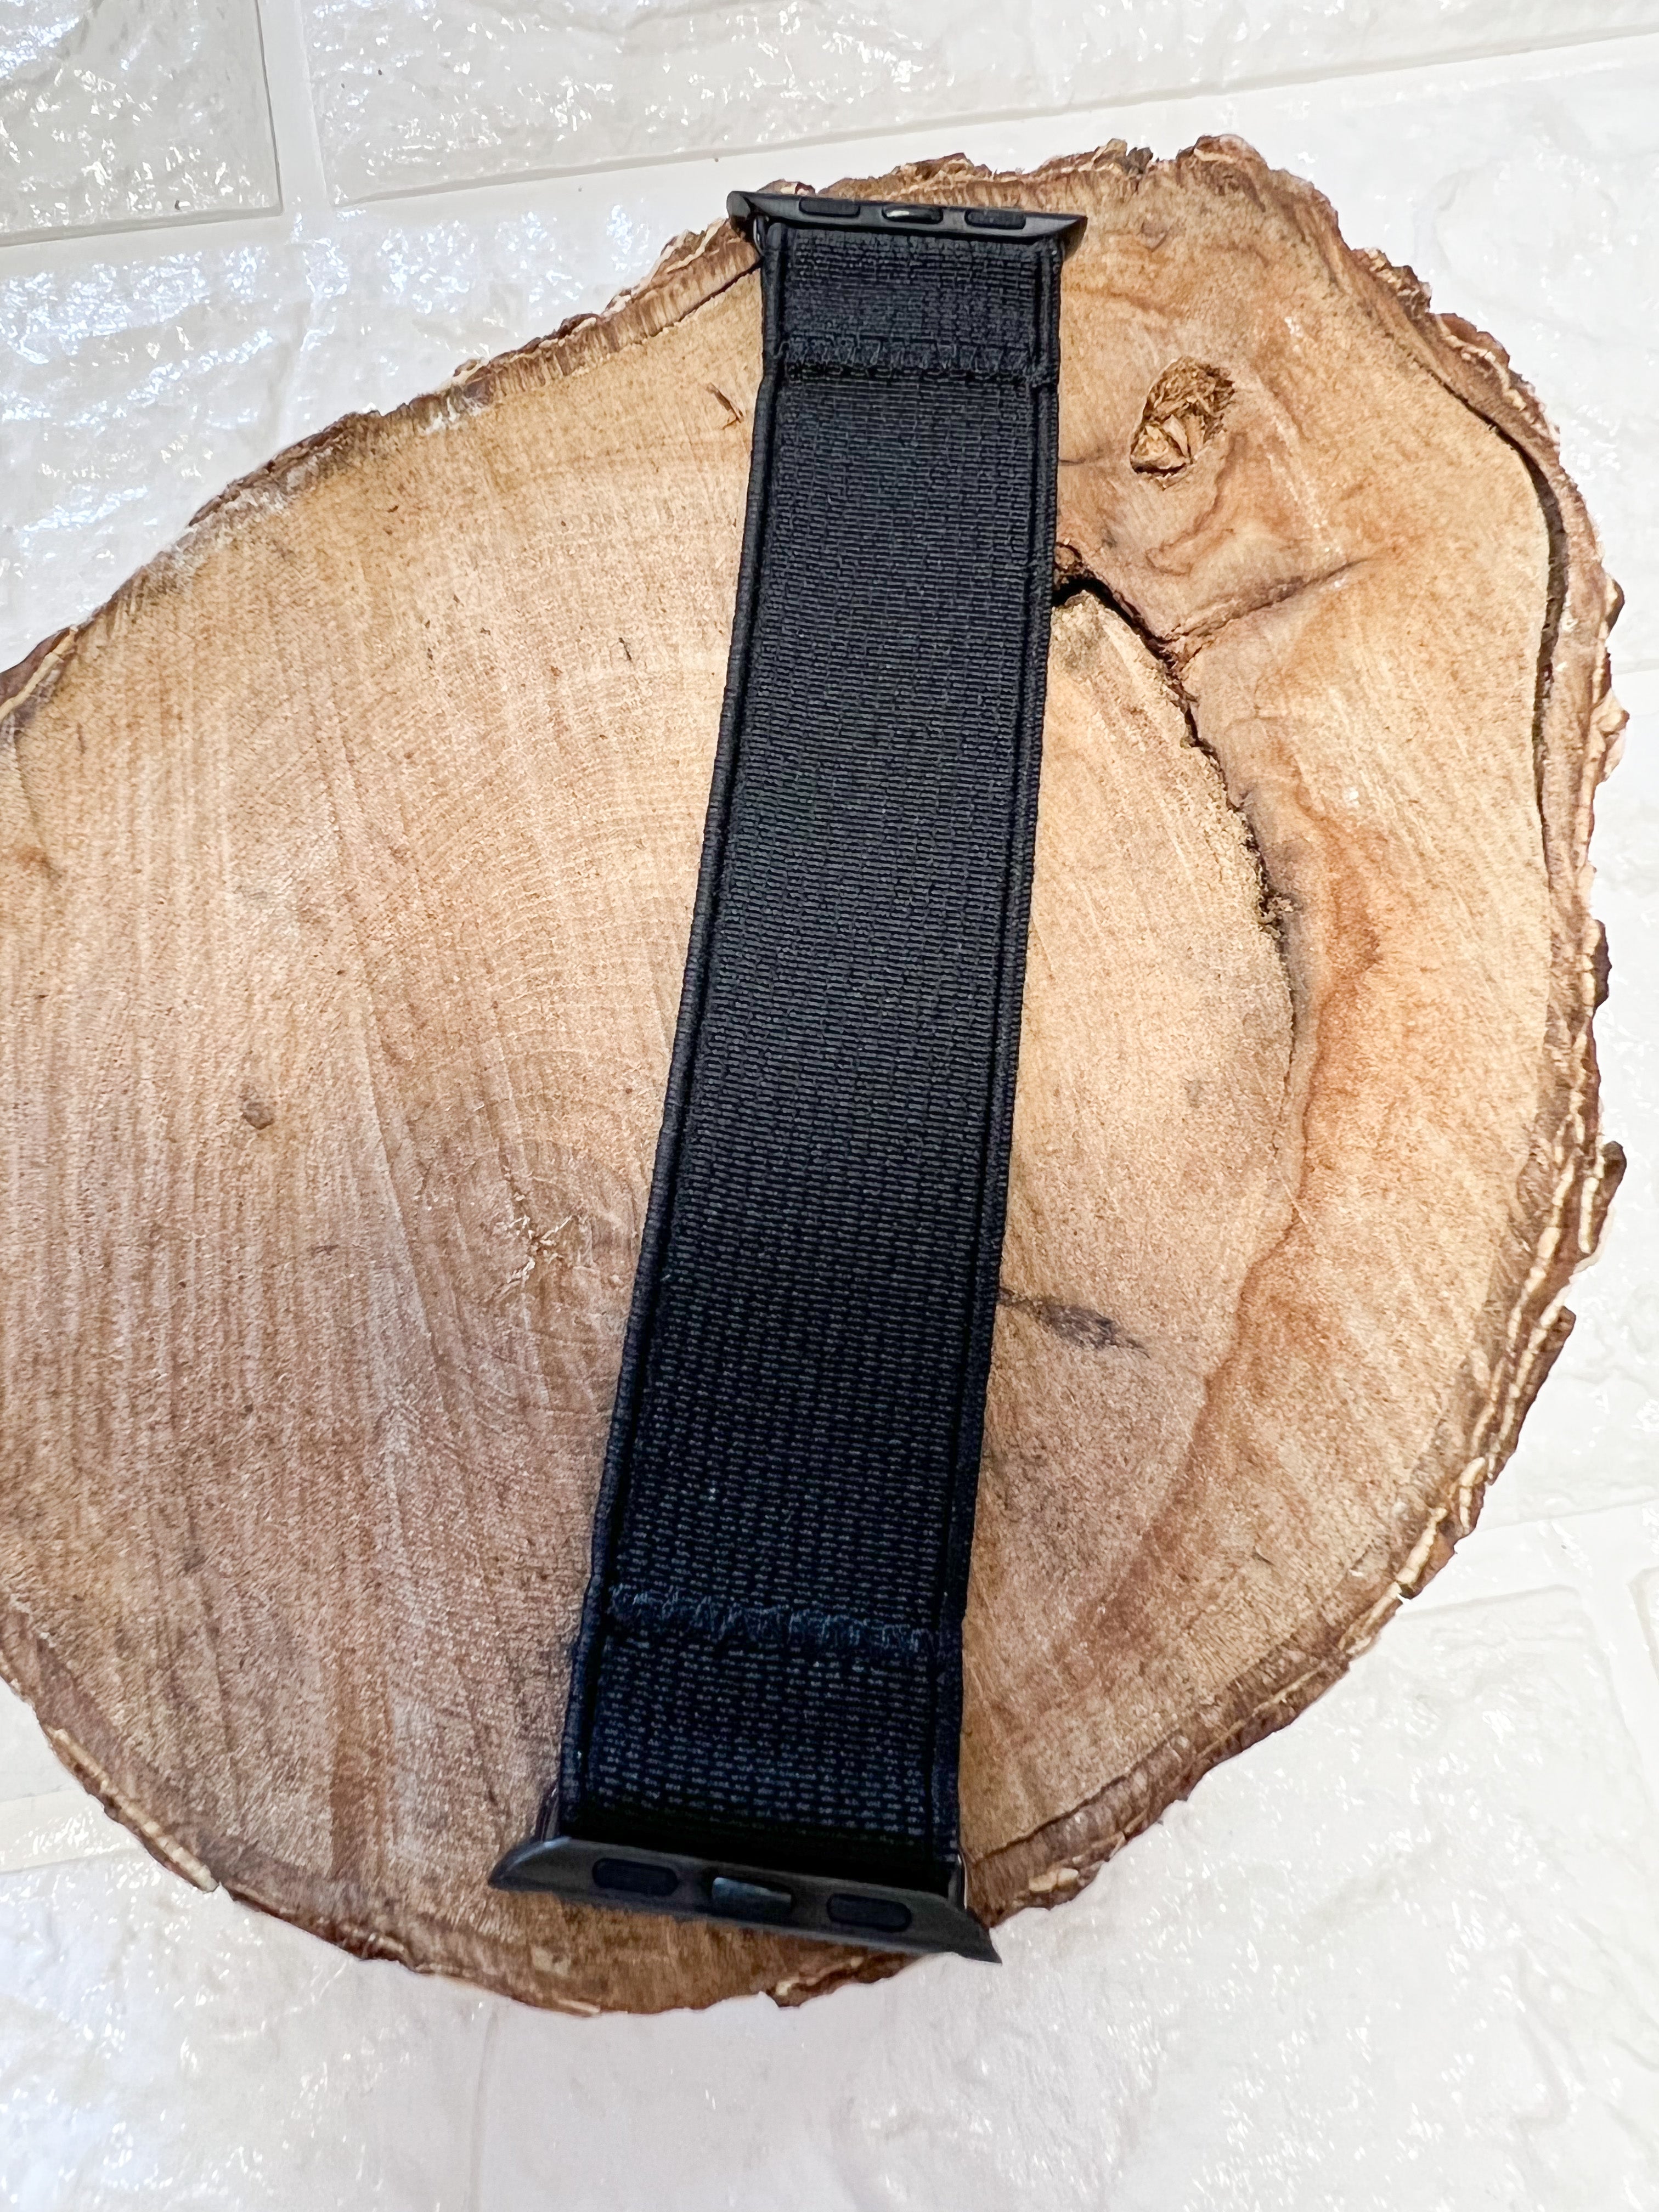 SOLID BLACK STRETCHY FABRIC WATCH BAND